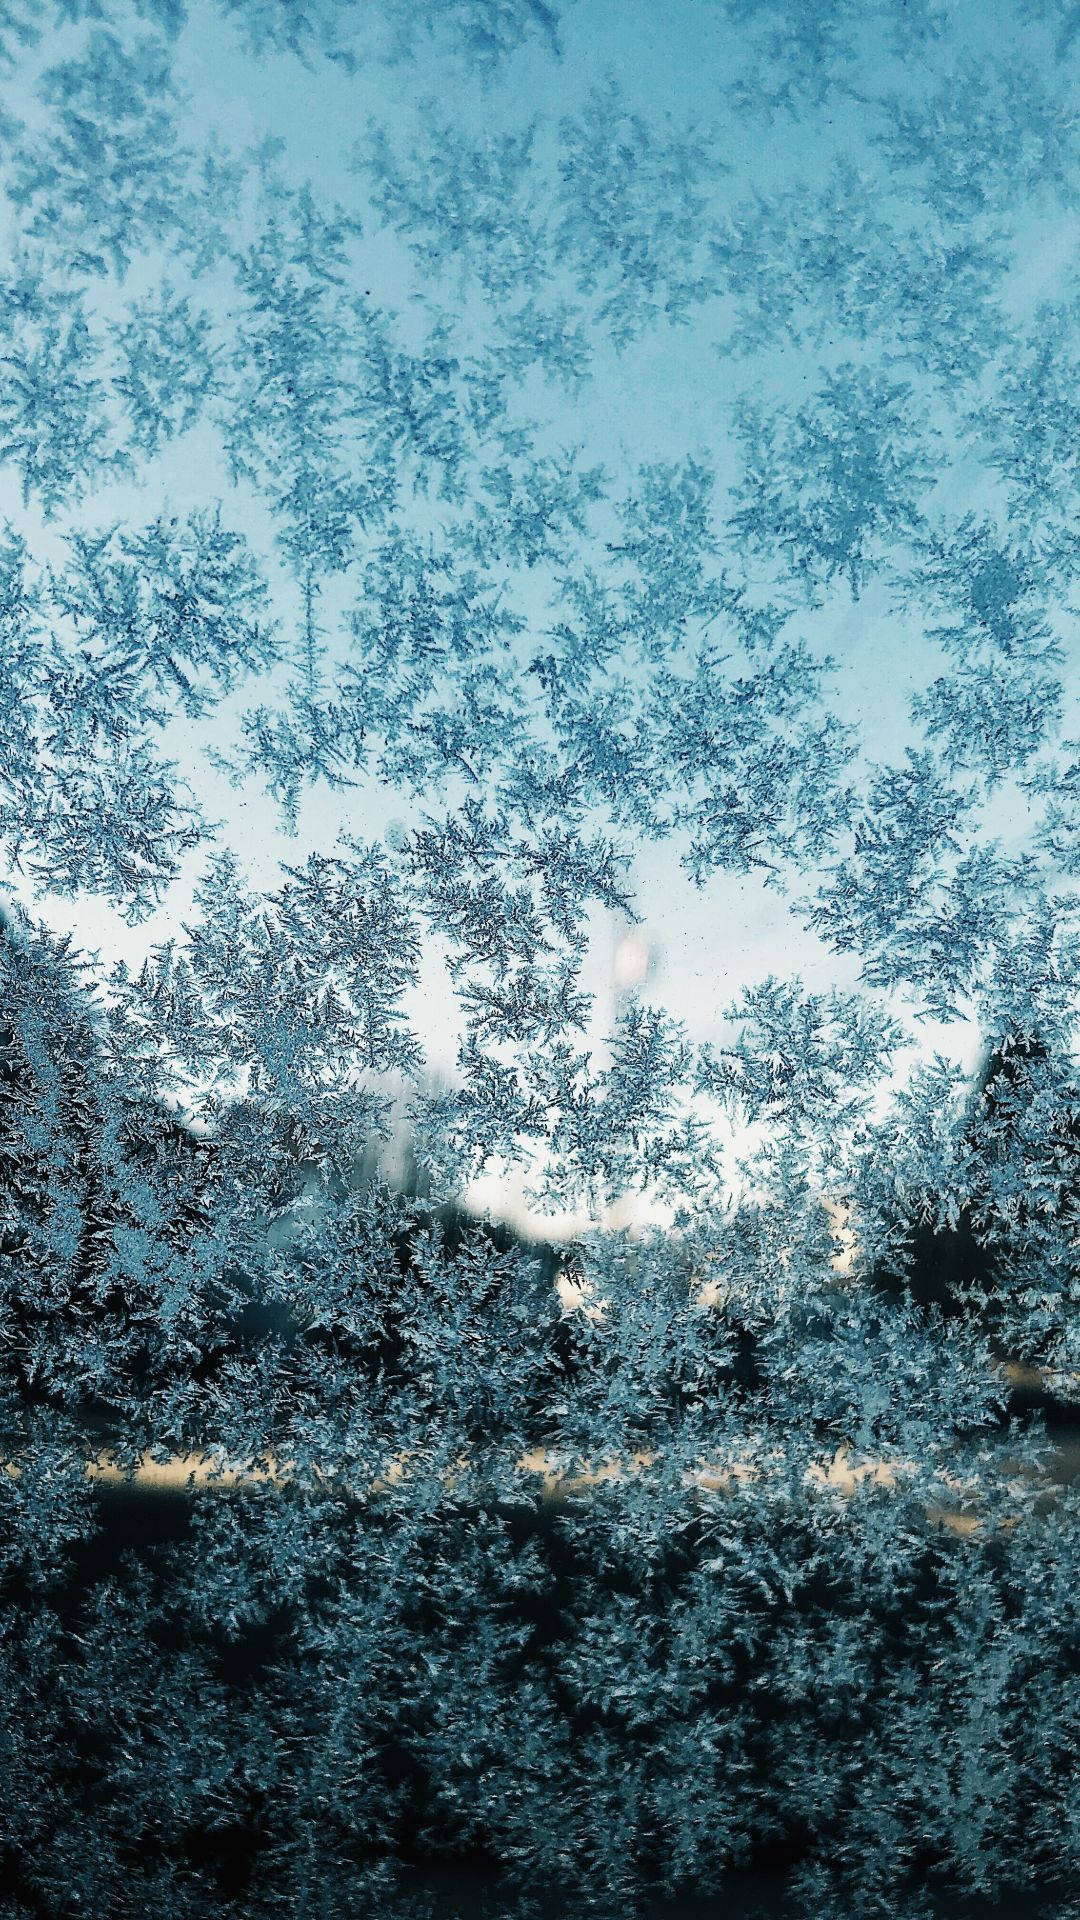 Marvel at the intricate beauty of a snowflake falling outside your window captured from your cutting edge Snowflake Iphone Wallpaper